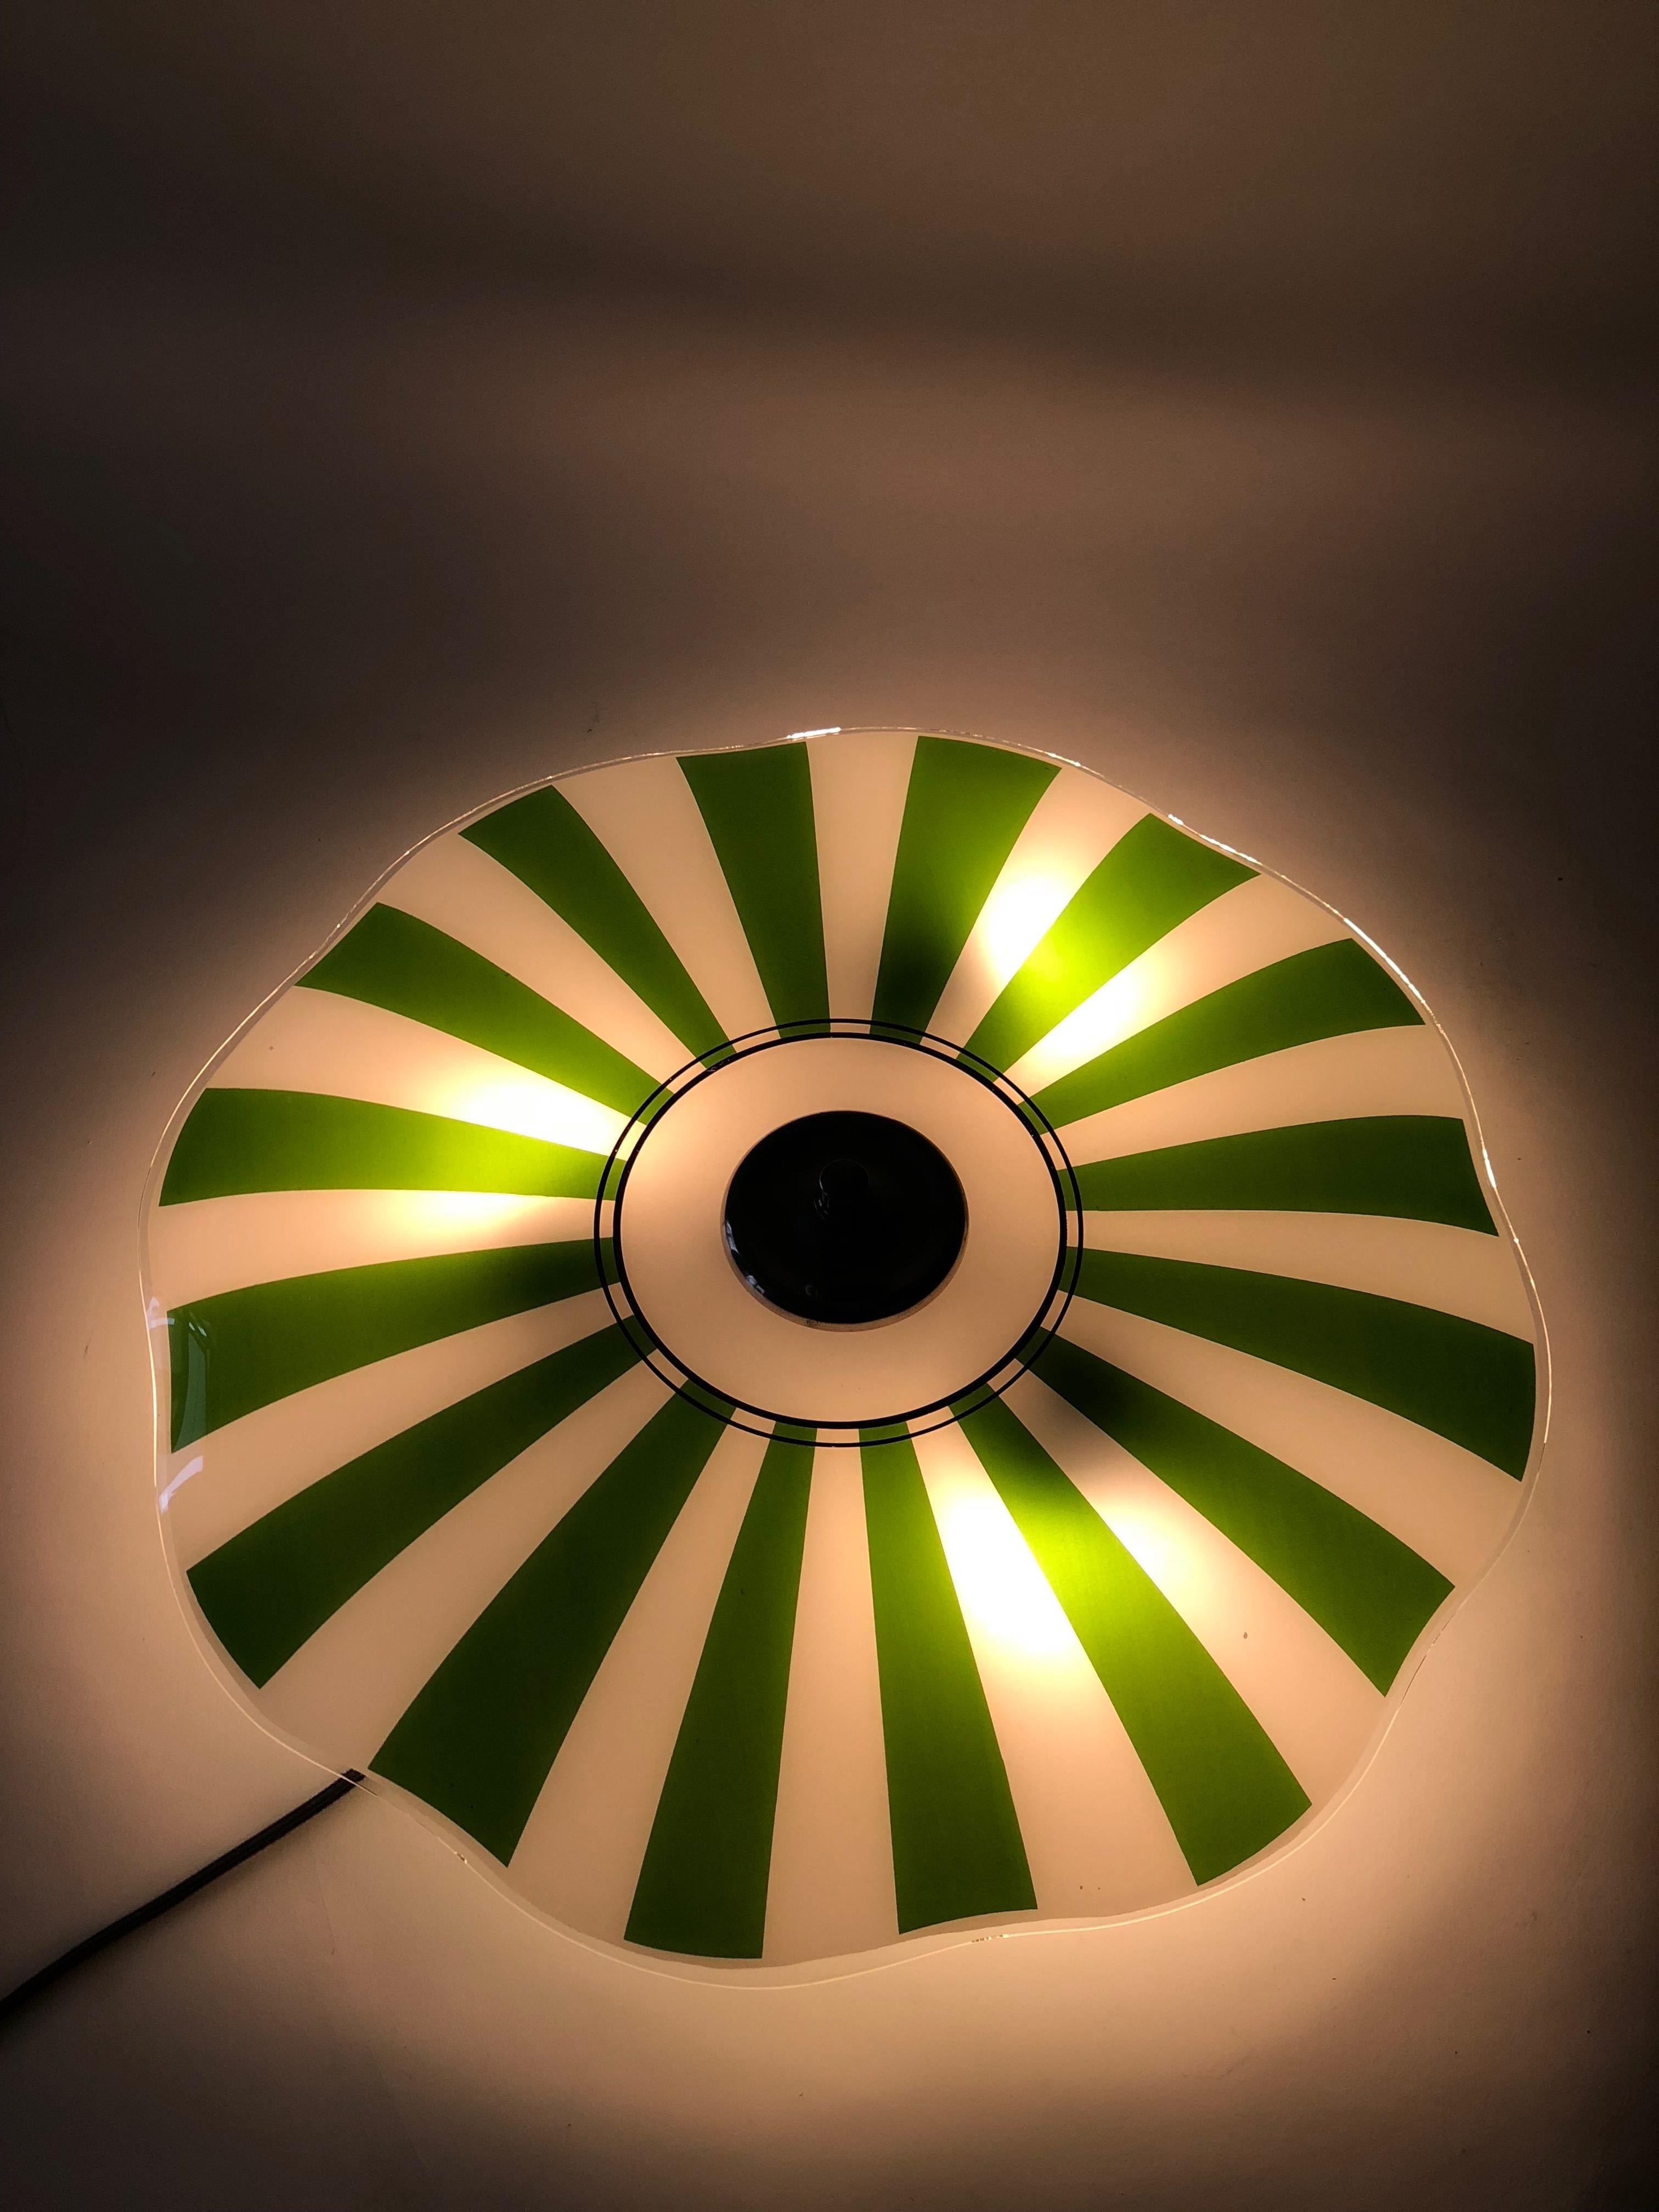 Glass wall lamp from designfornication. This is our own design based on a vintage glass plate, that was produced in Czechoslovakia in 1956.
The light produced, makes a beautiful atmosphere enhancing your living environment. If you choose to use the